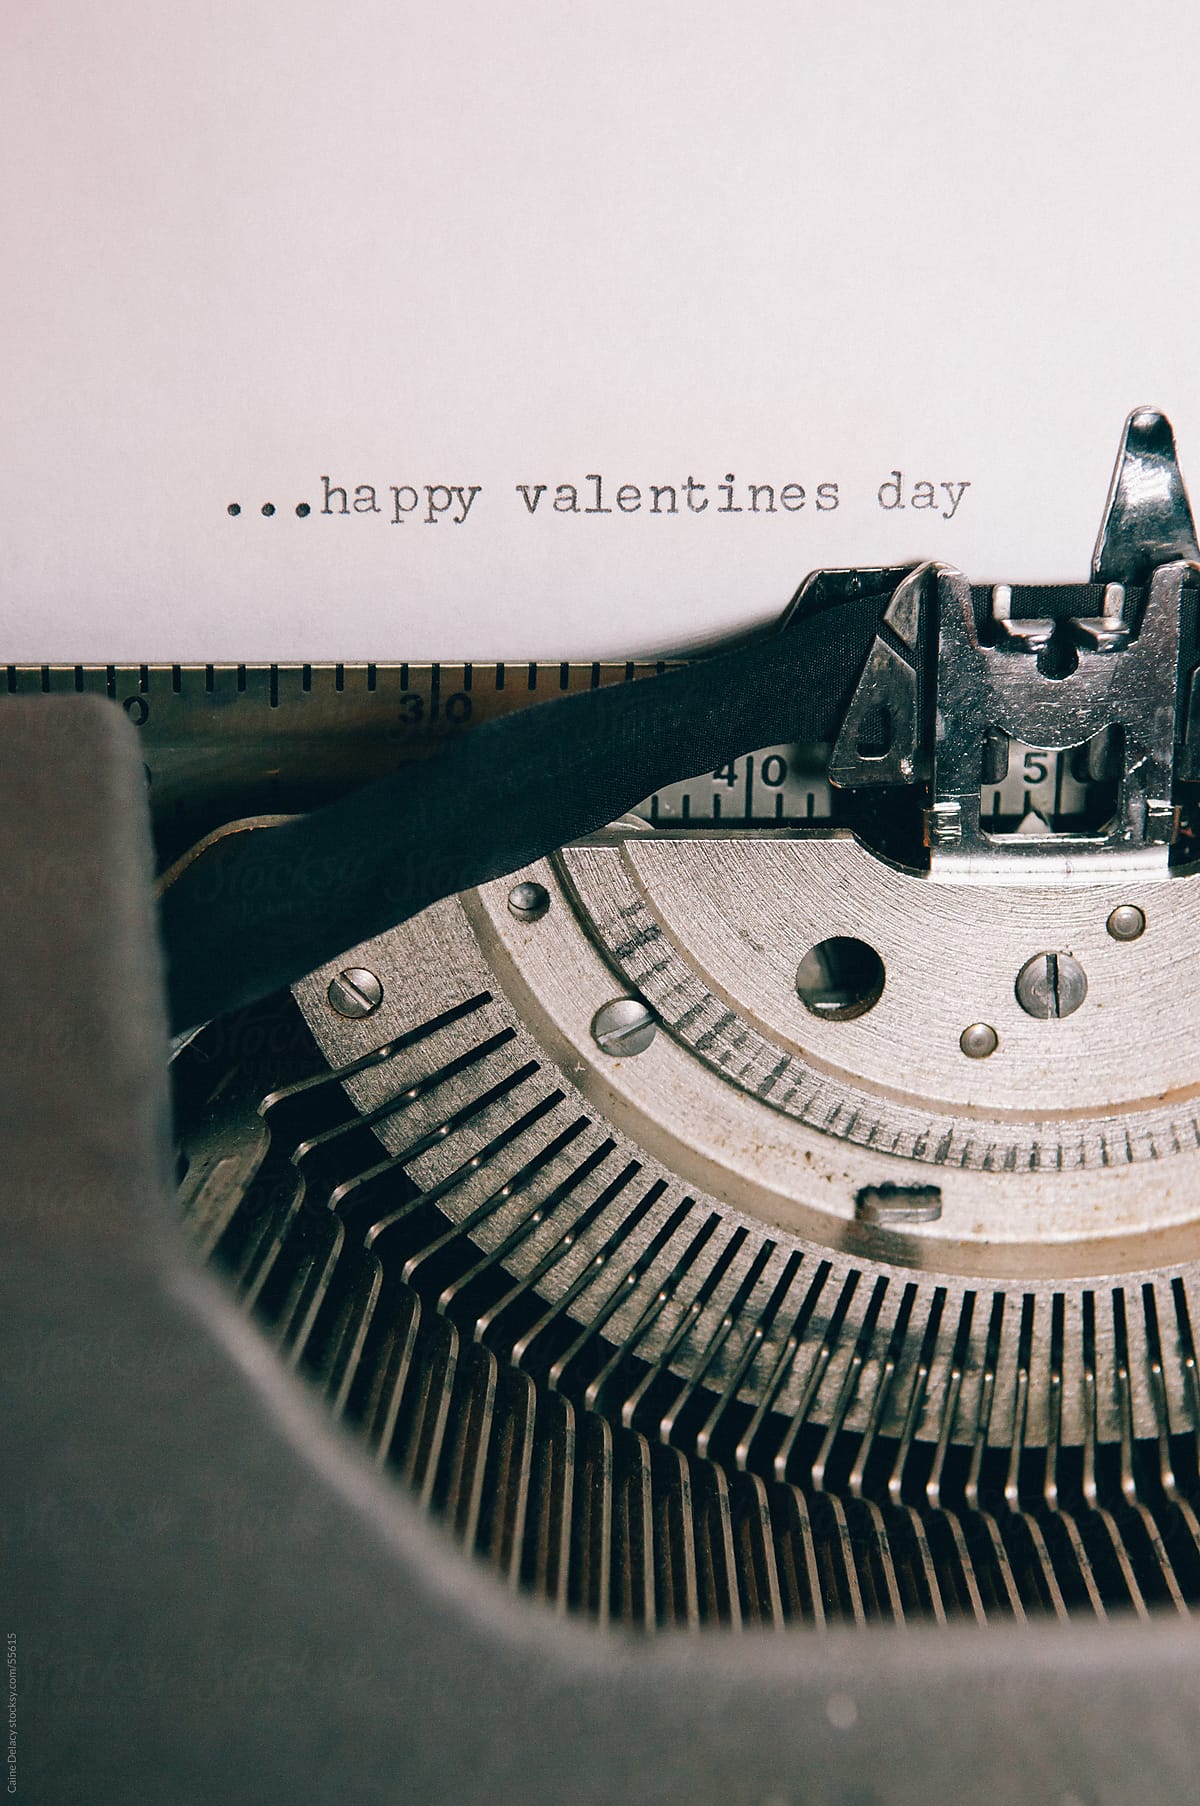 Valentines Day message type on paper using an old typewriter